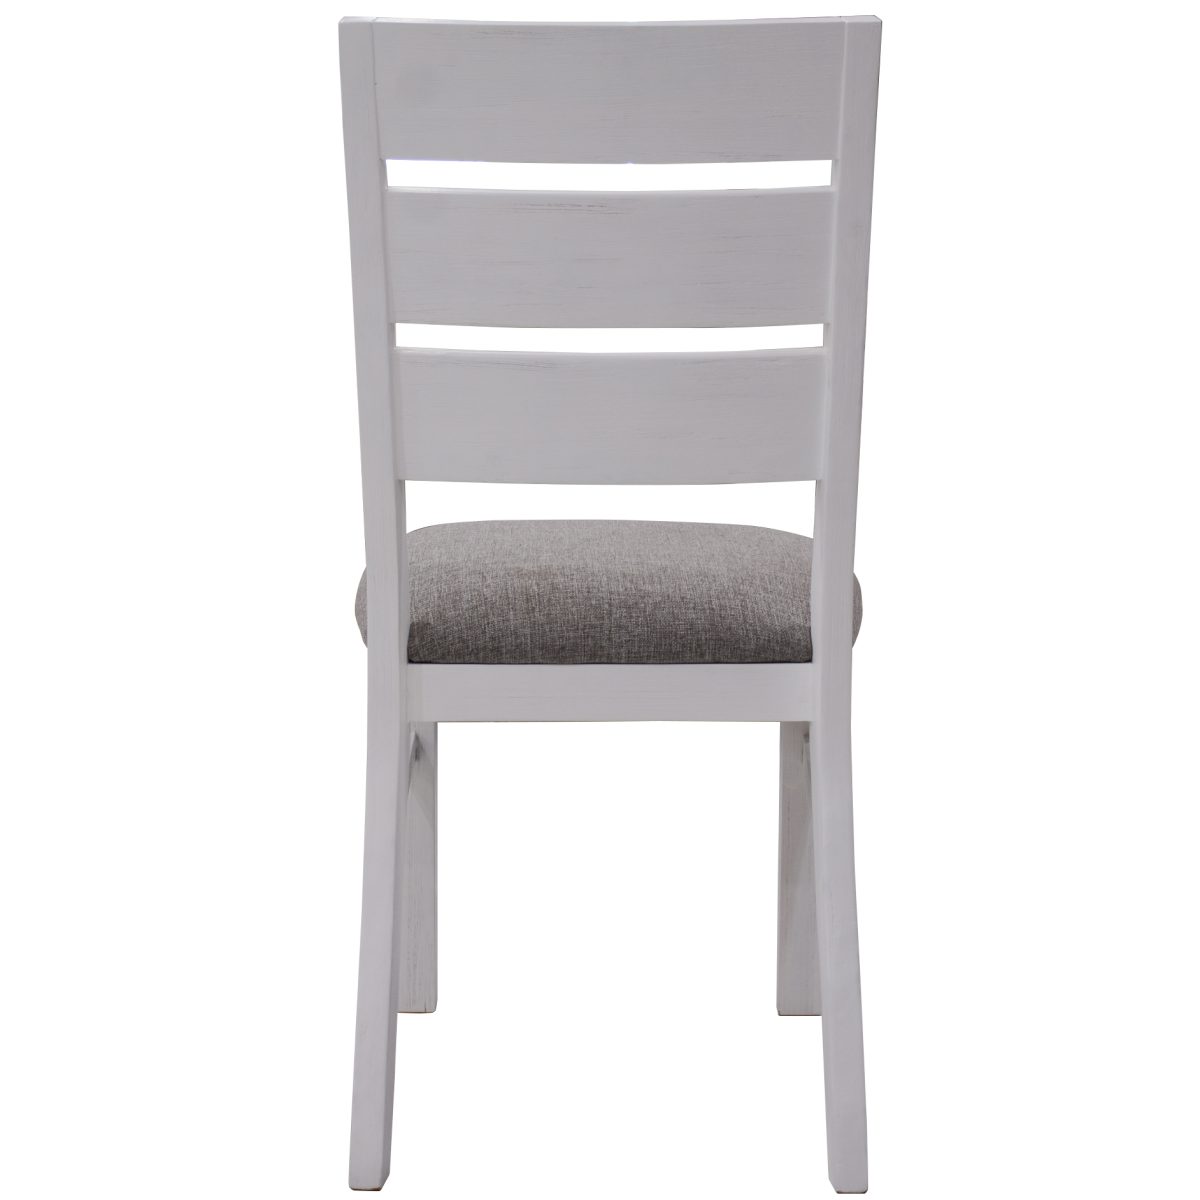 Plumeria Dining Chair Solid Acacia Wood Dining Furniture – White Brush – 2